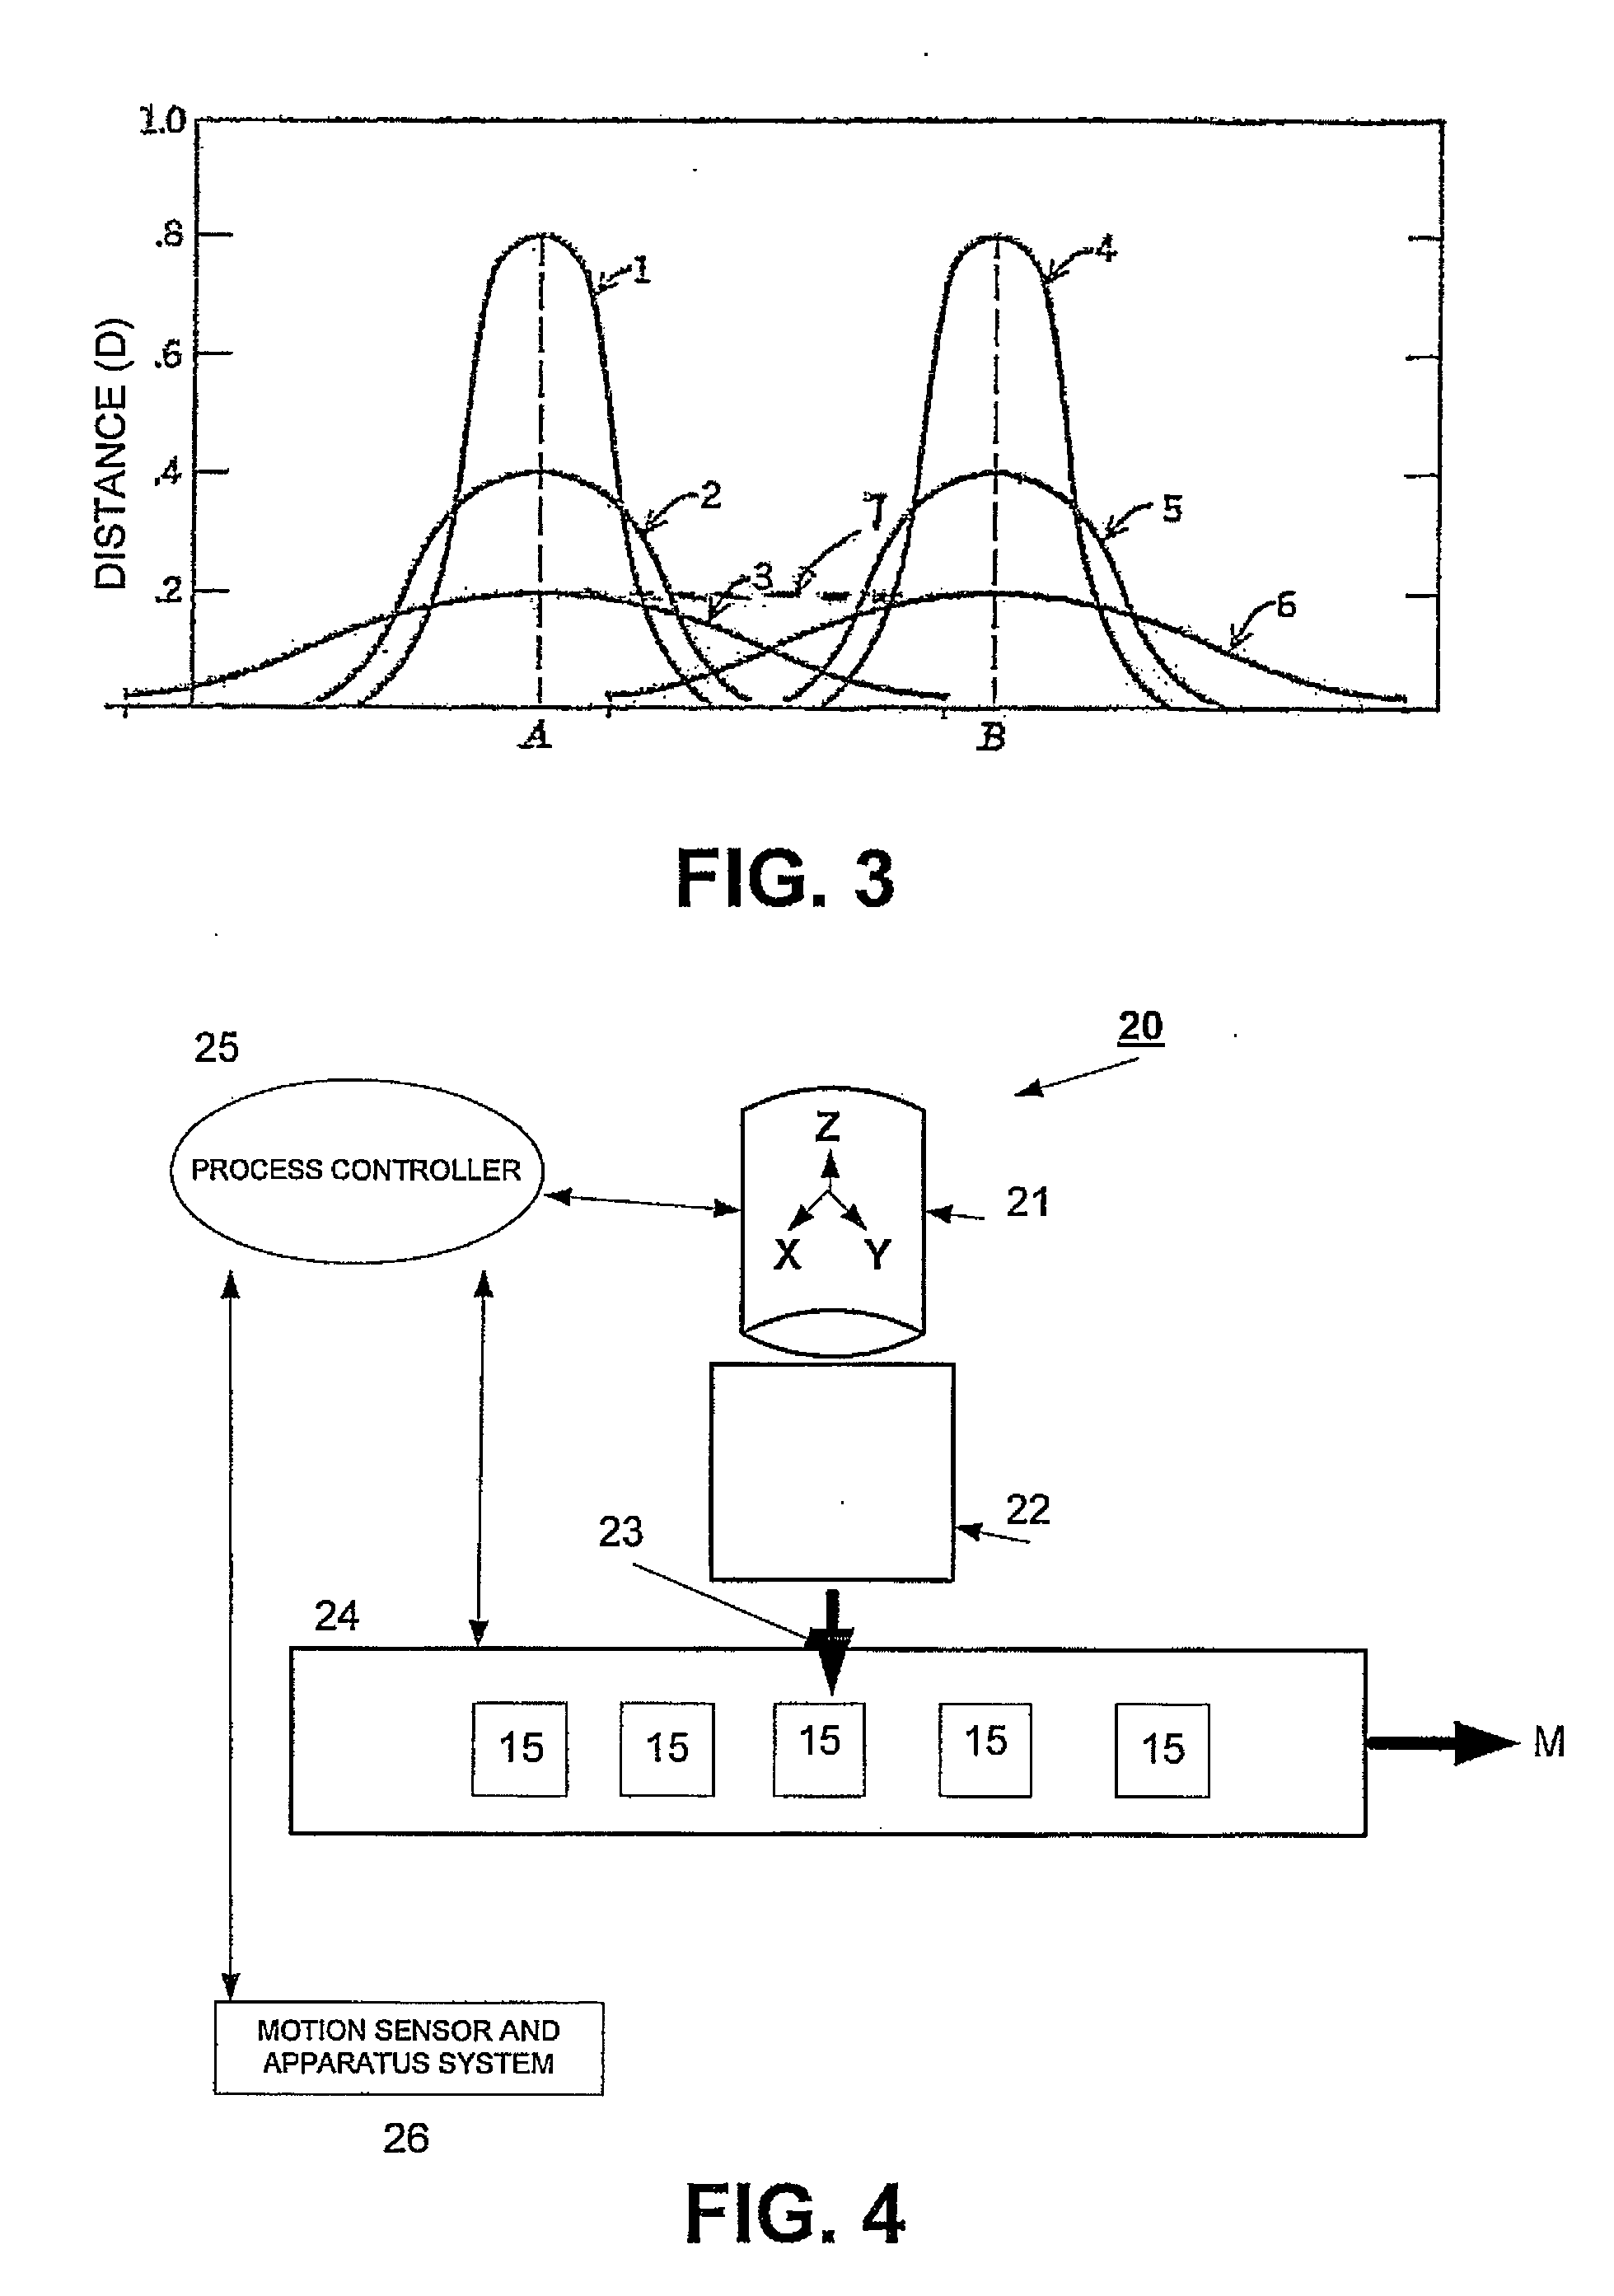 Laser Diode Array with Fiber Optic Terminaton for Surface Treatment of Materials